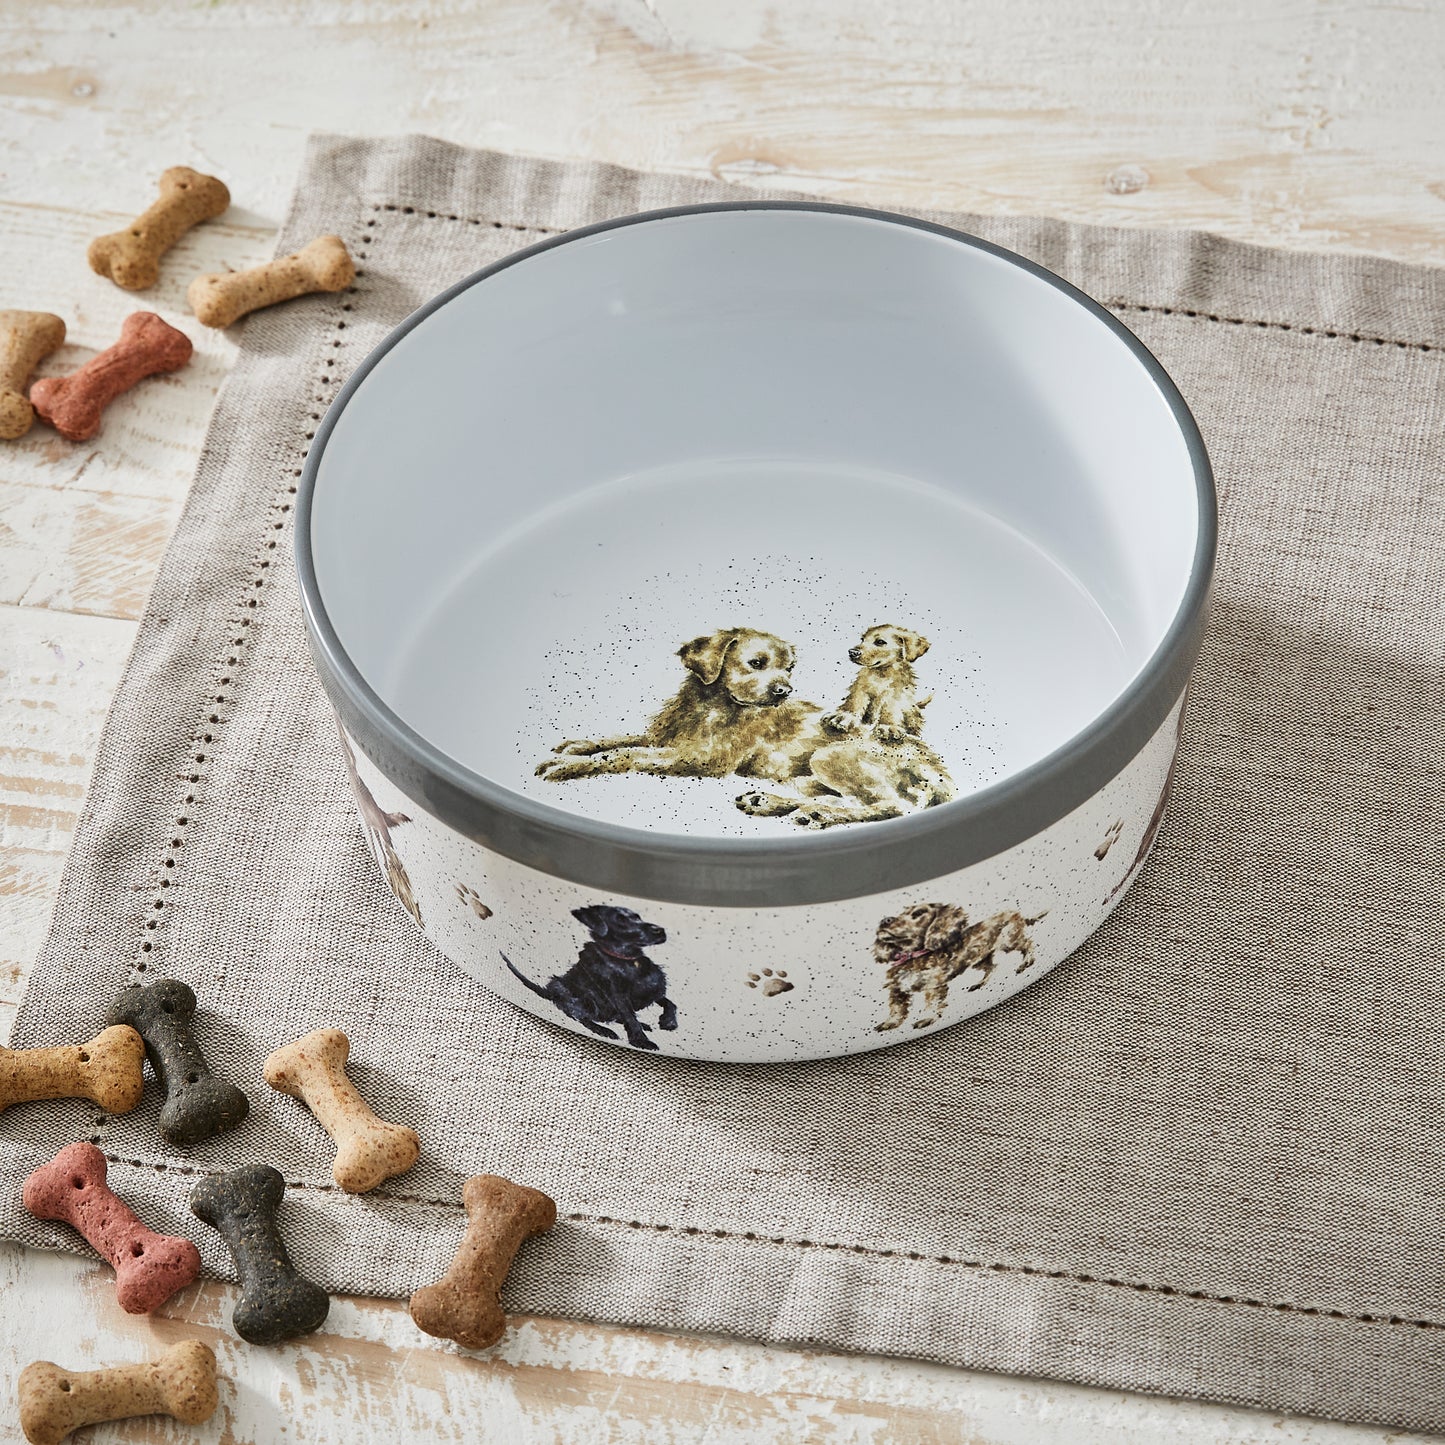 Royal Worcester Wrendale Designs 8 inch Pet Bowl Dogs